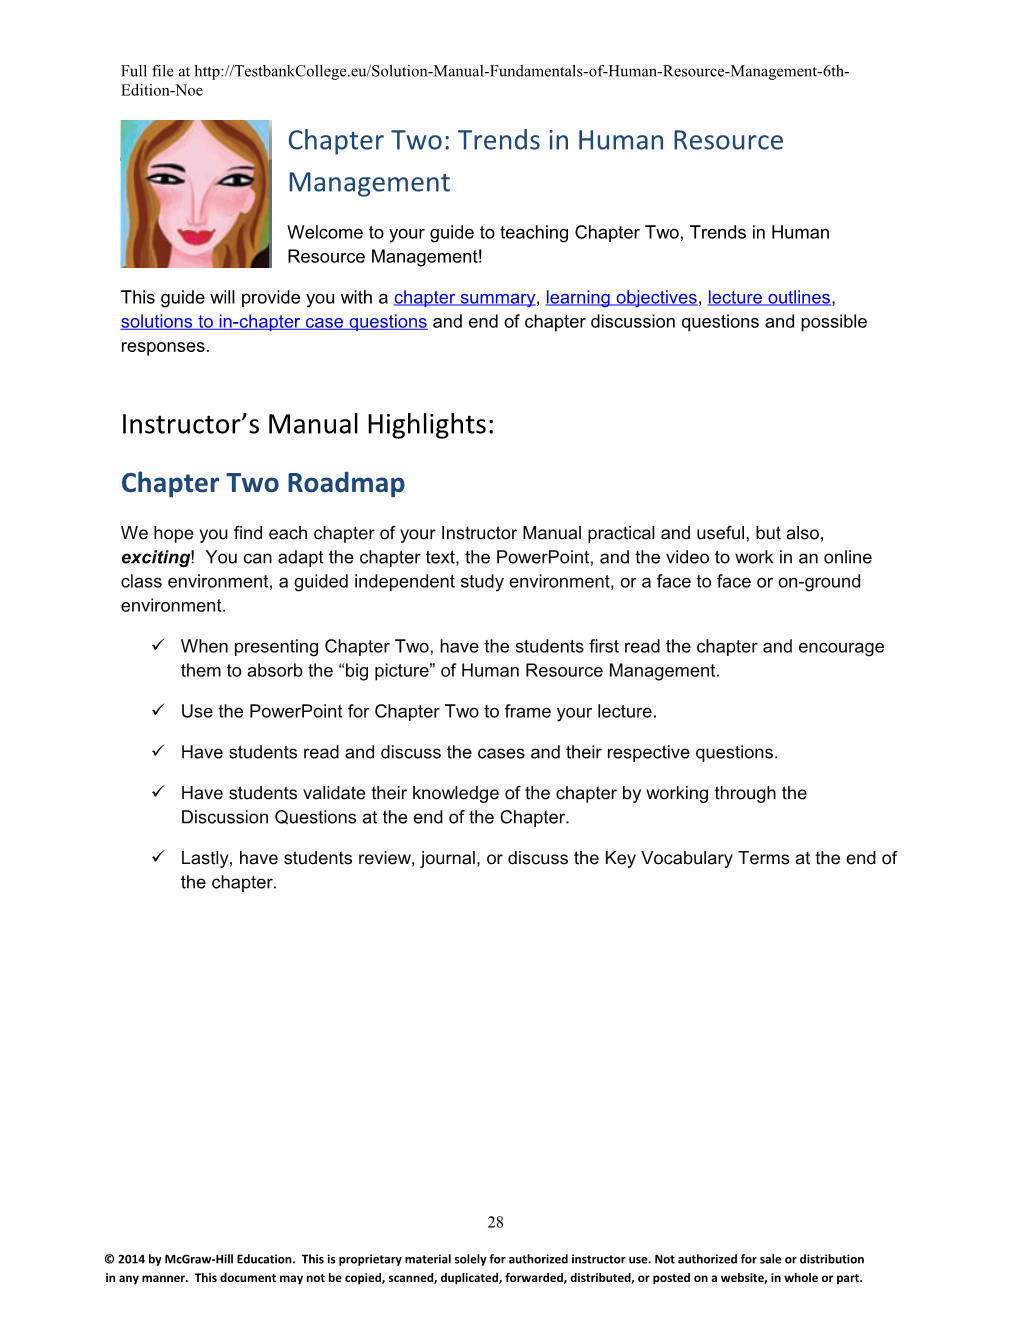 Chapter Two: Trends in Human Resource Management